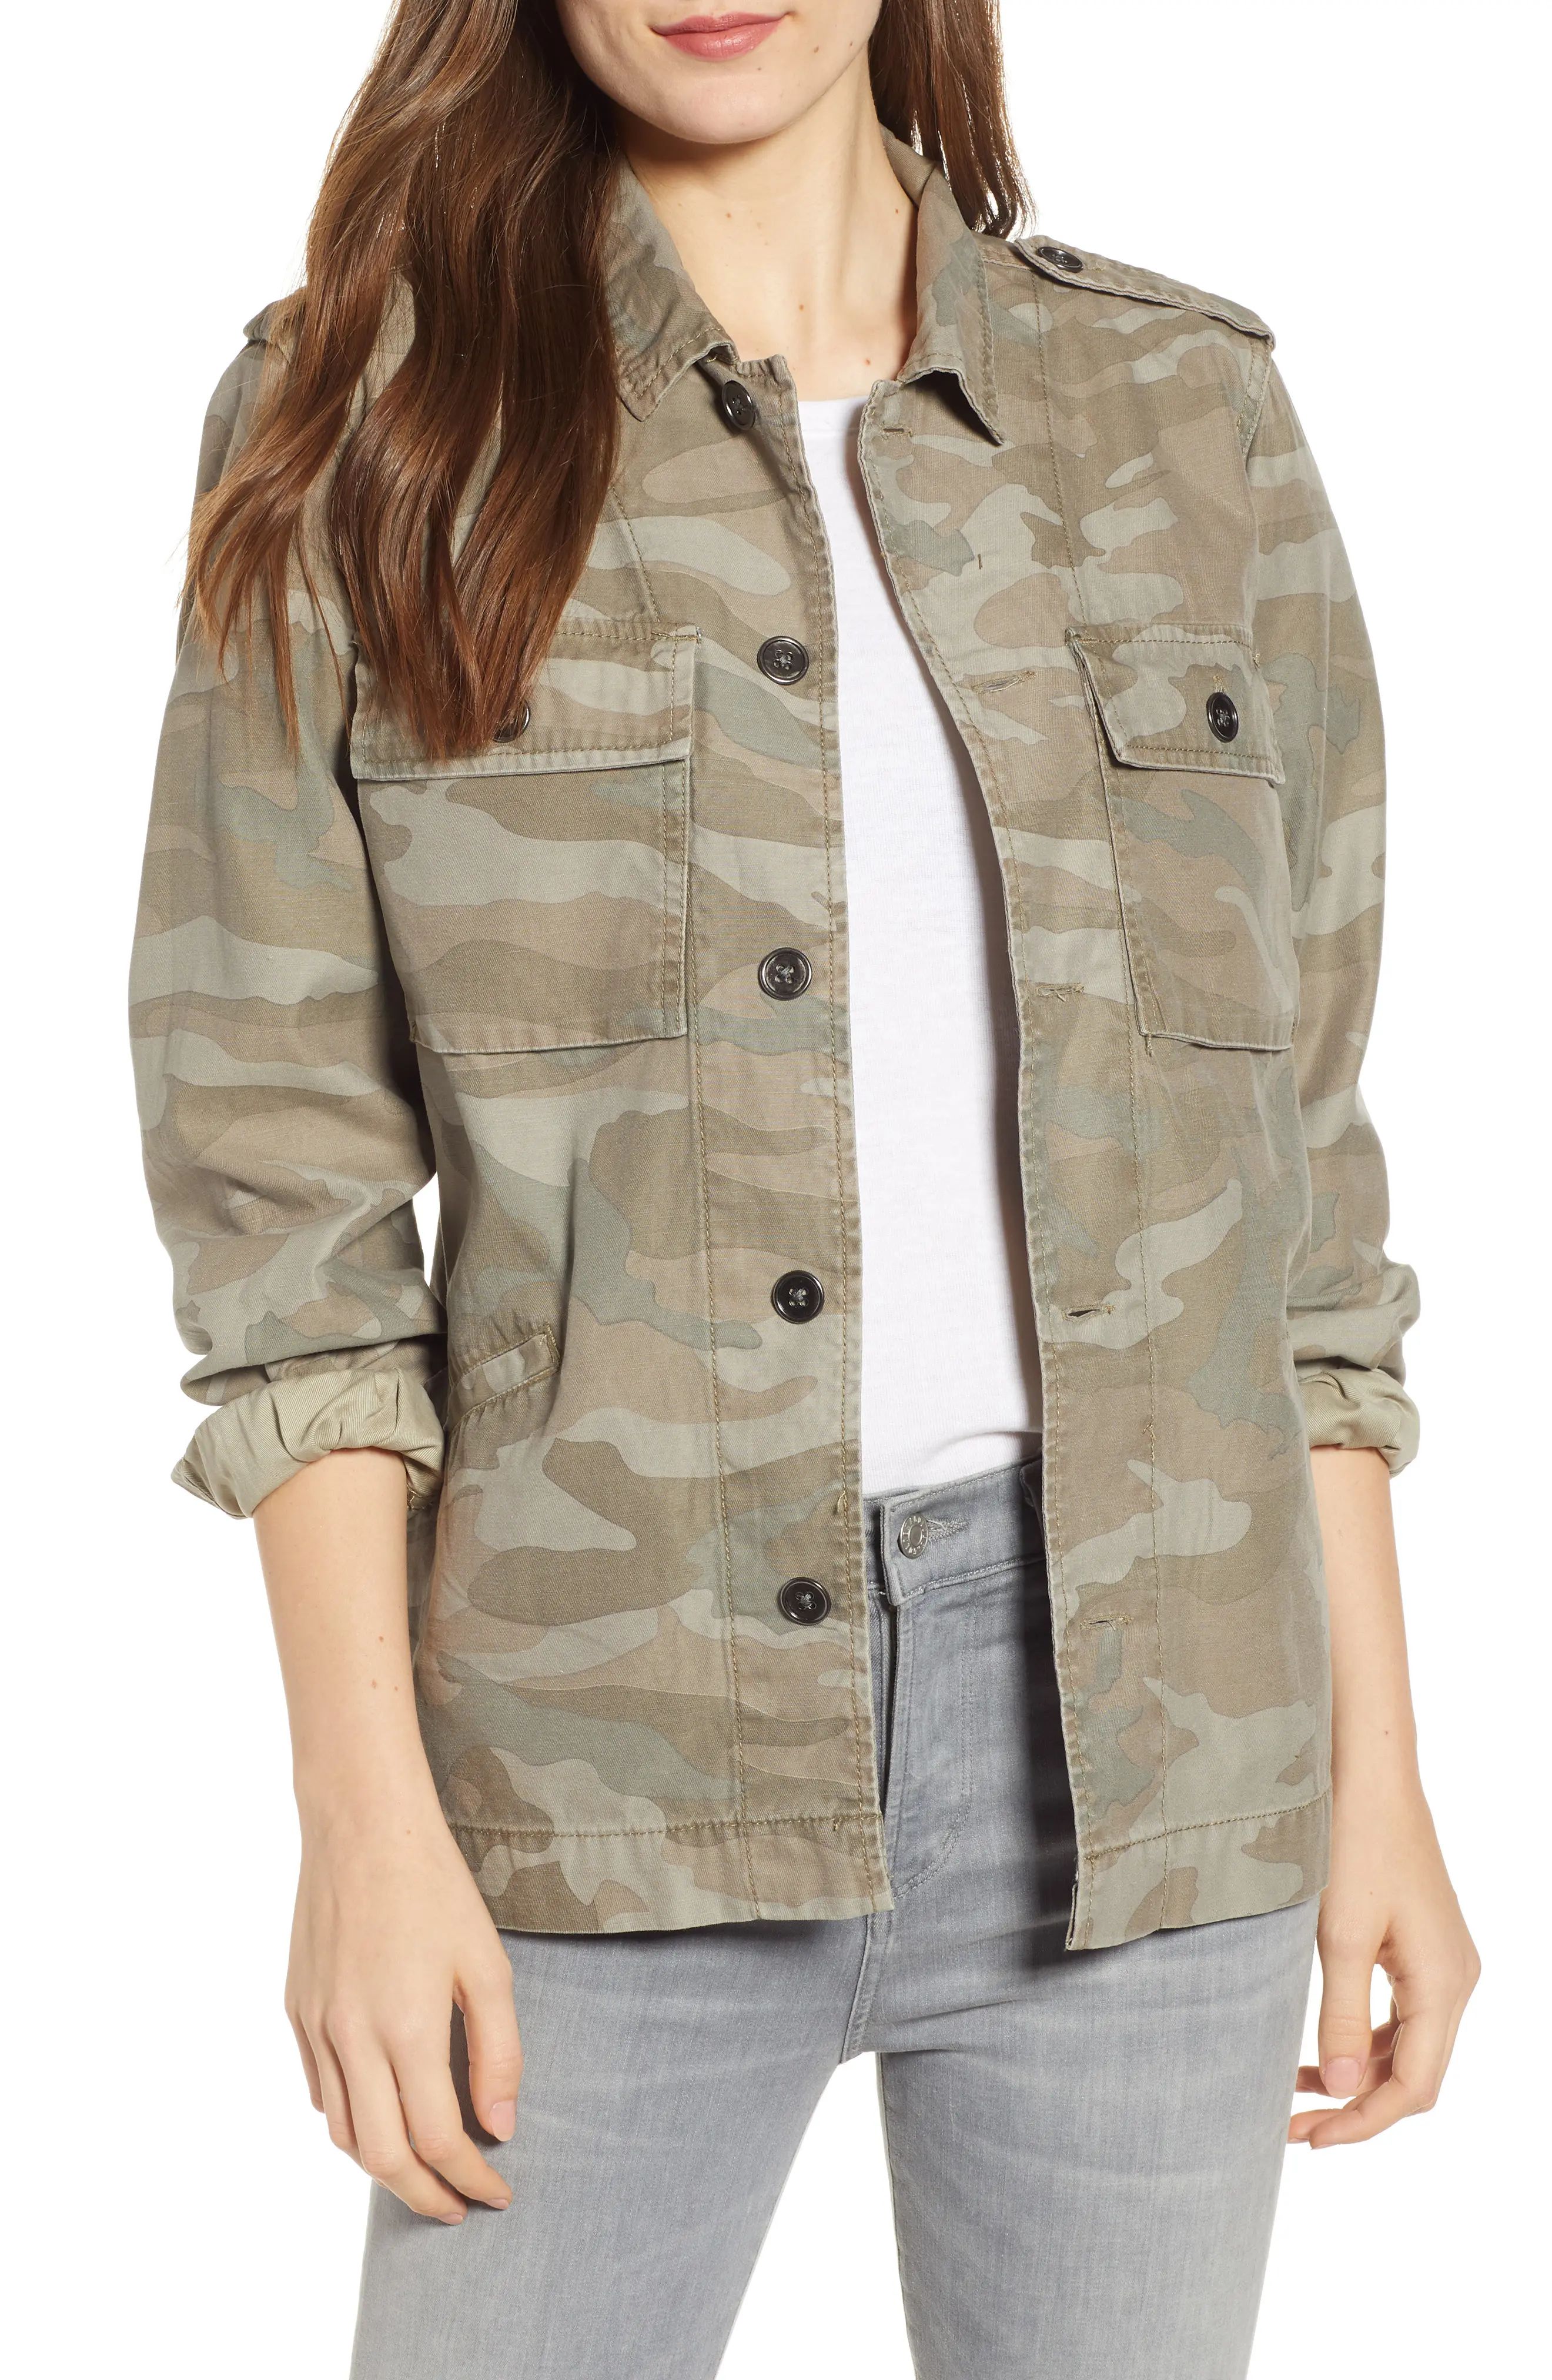 Women's Thread & Supply Mack Camouflage Jacket, Size Small - Grey | Nordstrom